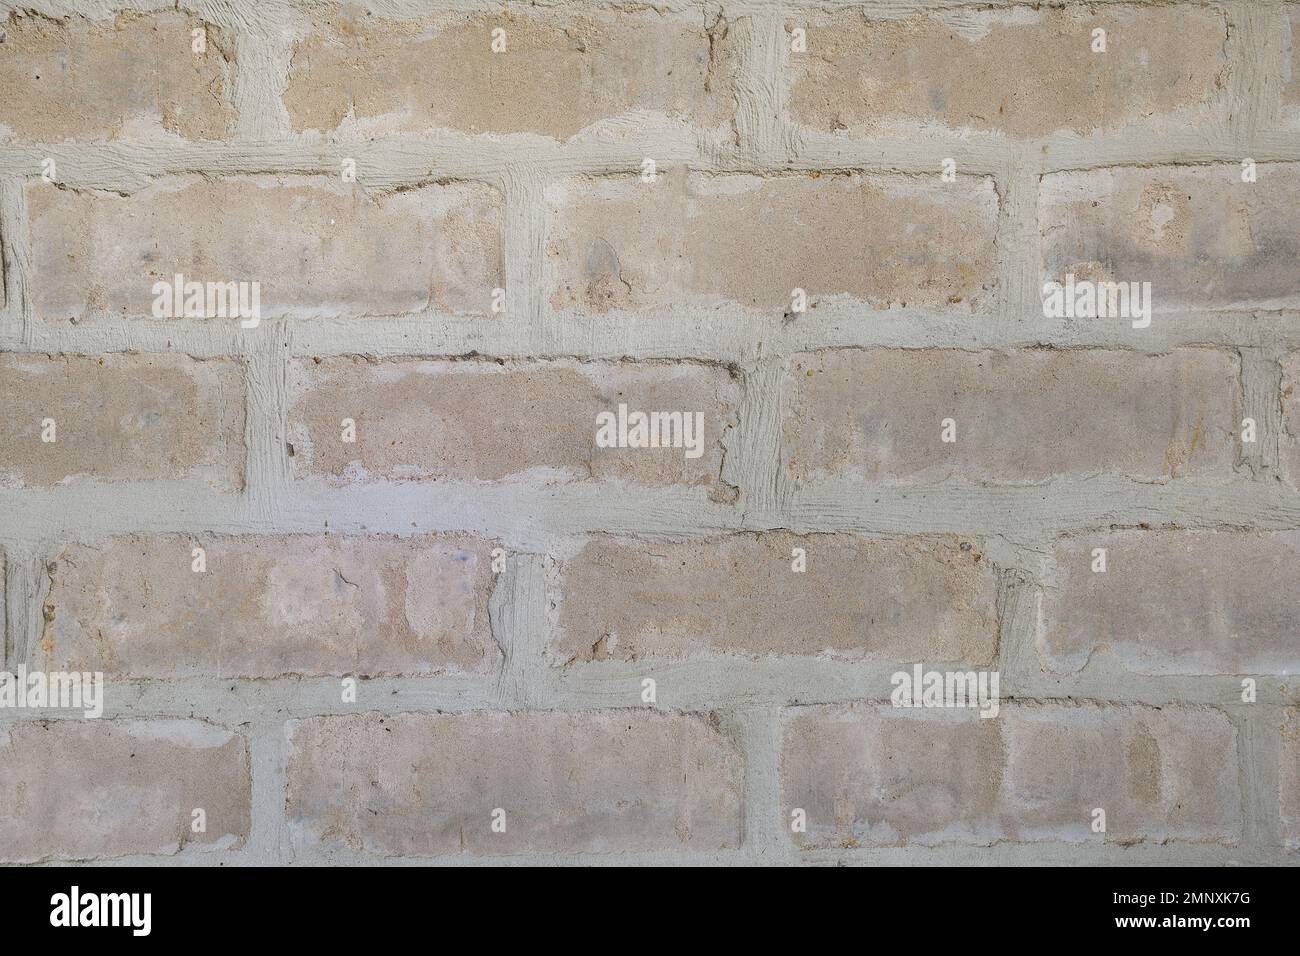 A close-up view of a section of warm, pinkish coloured, coarse, rustic, sandstone looking house bricks with vertical and horizontal joint lines Stock Photo